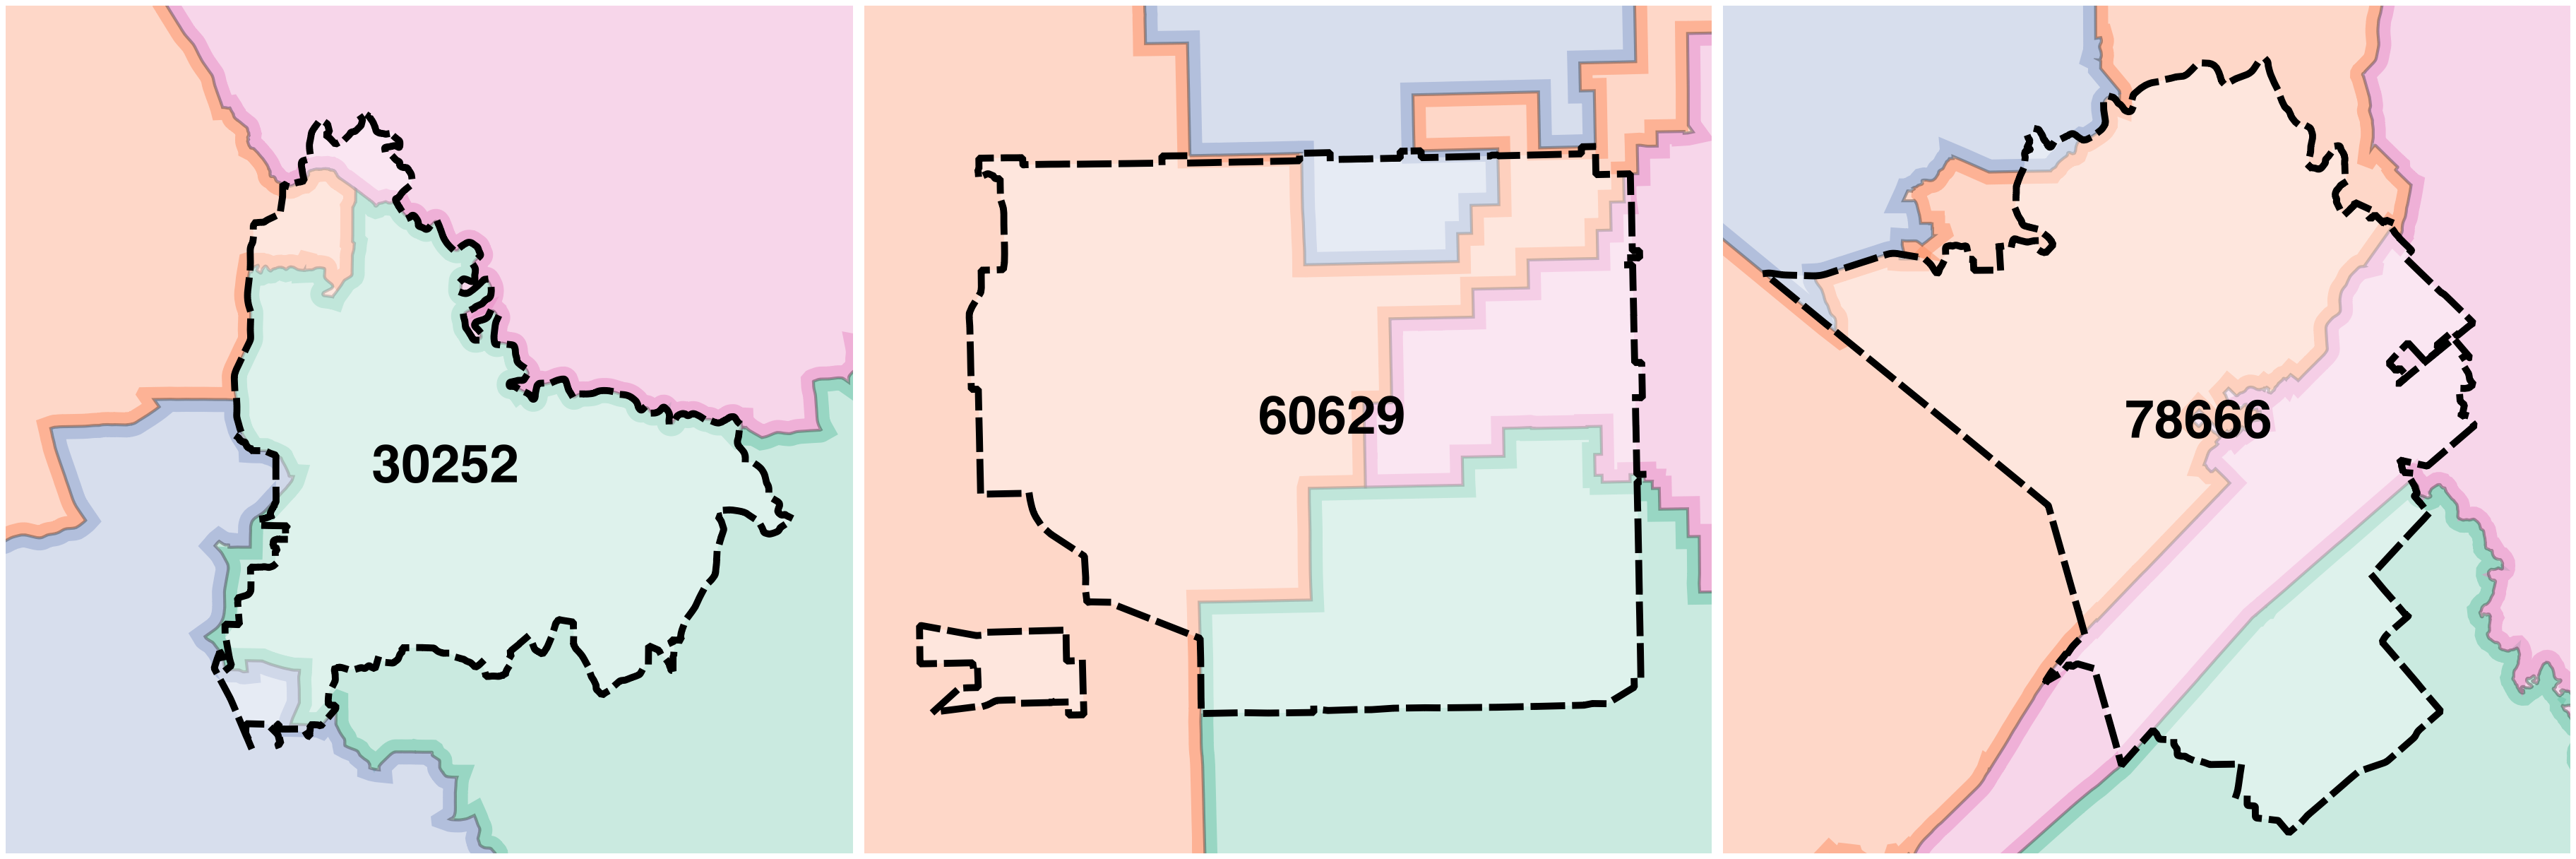 ZIP codes sometimes overlap with 4 congressional districts